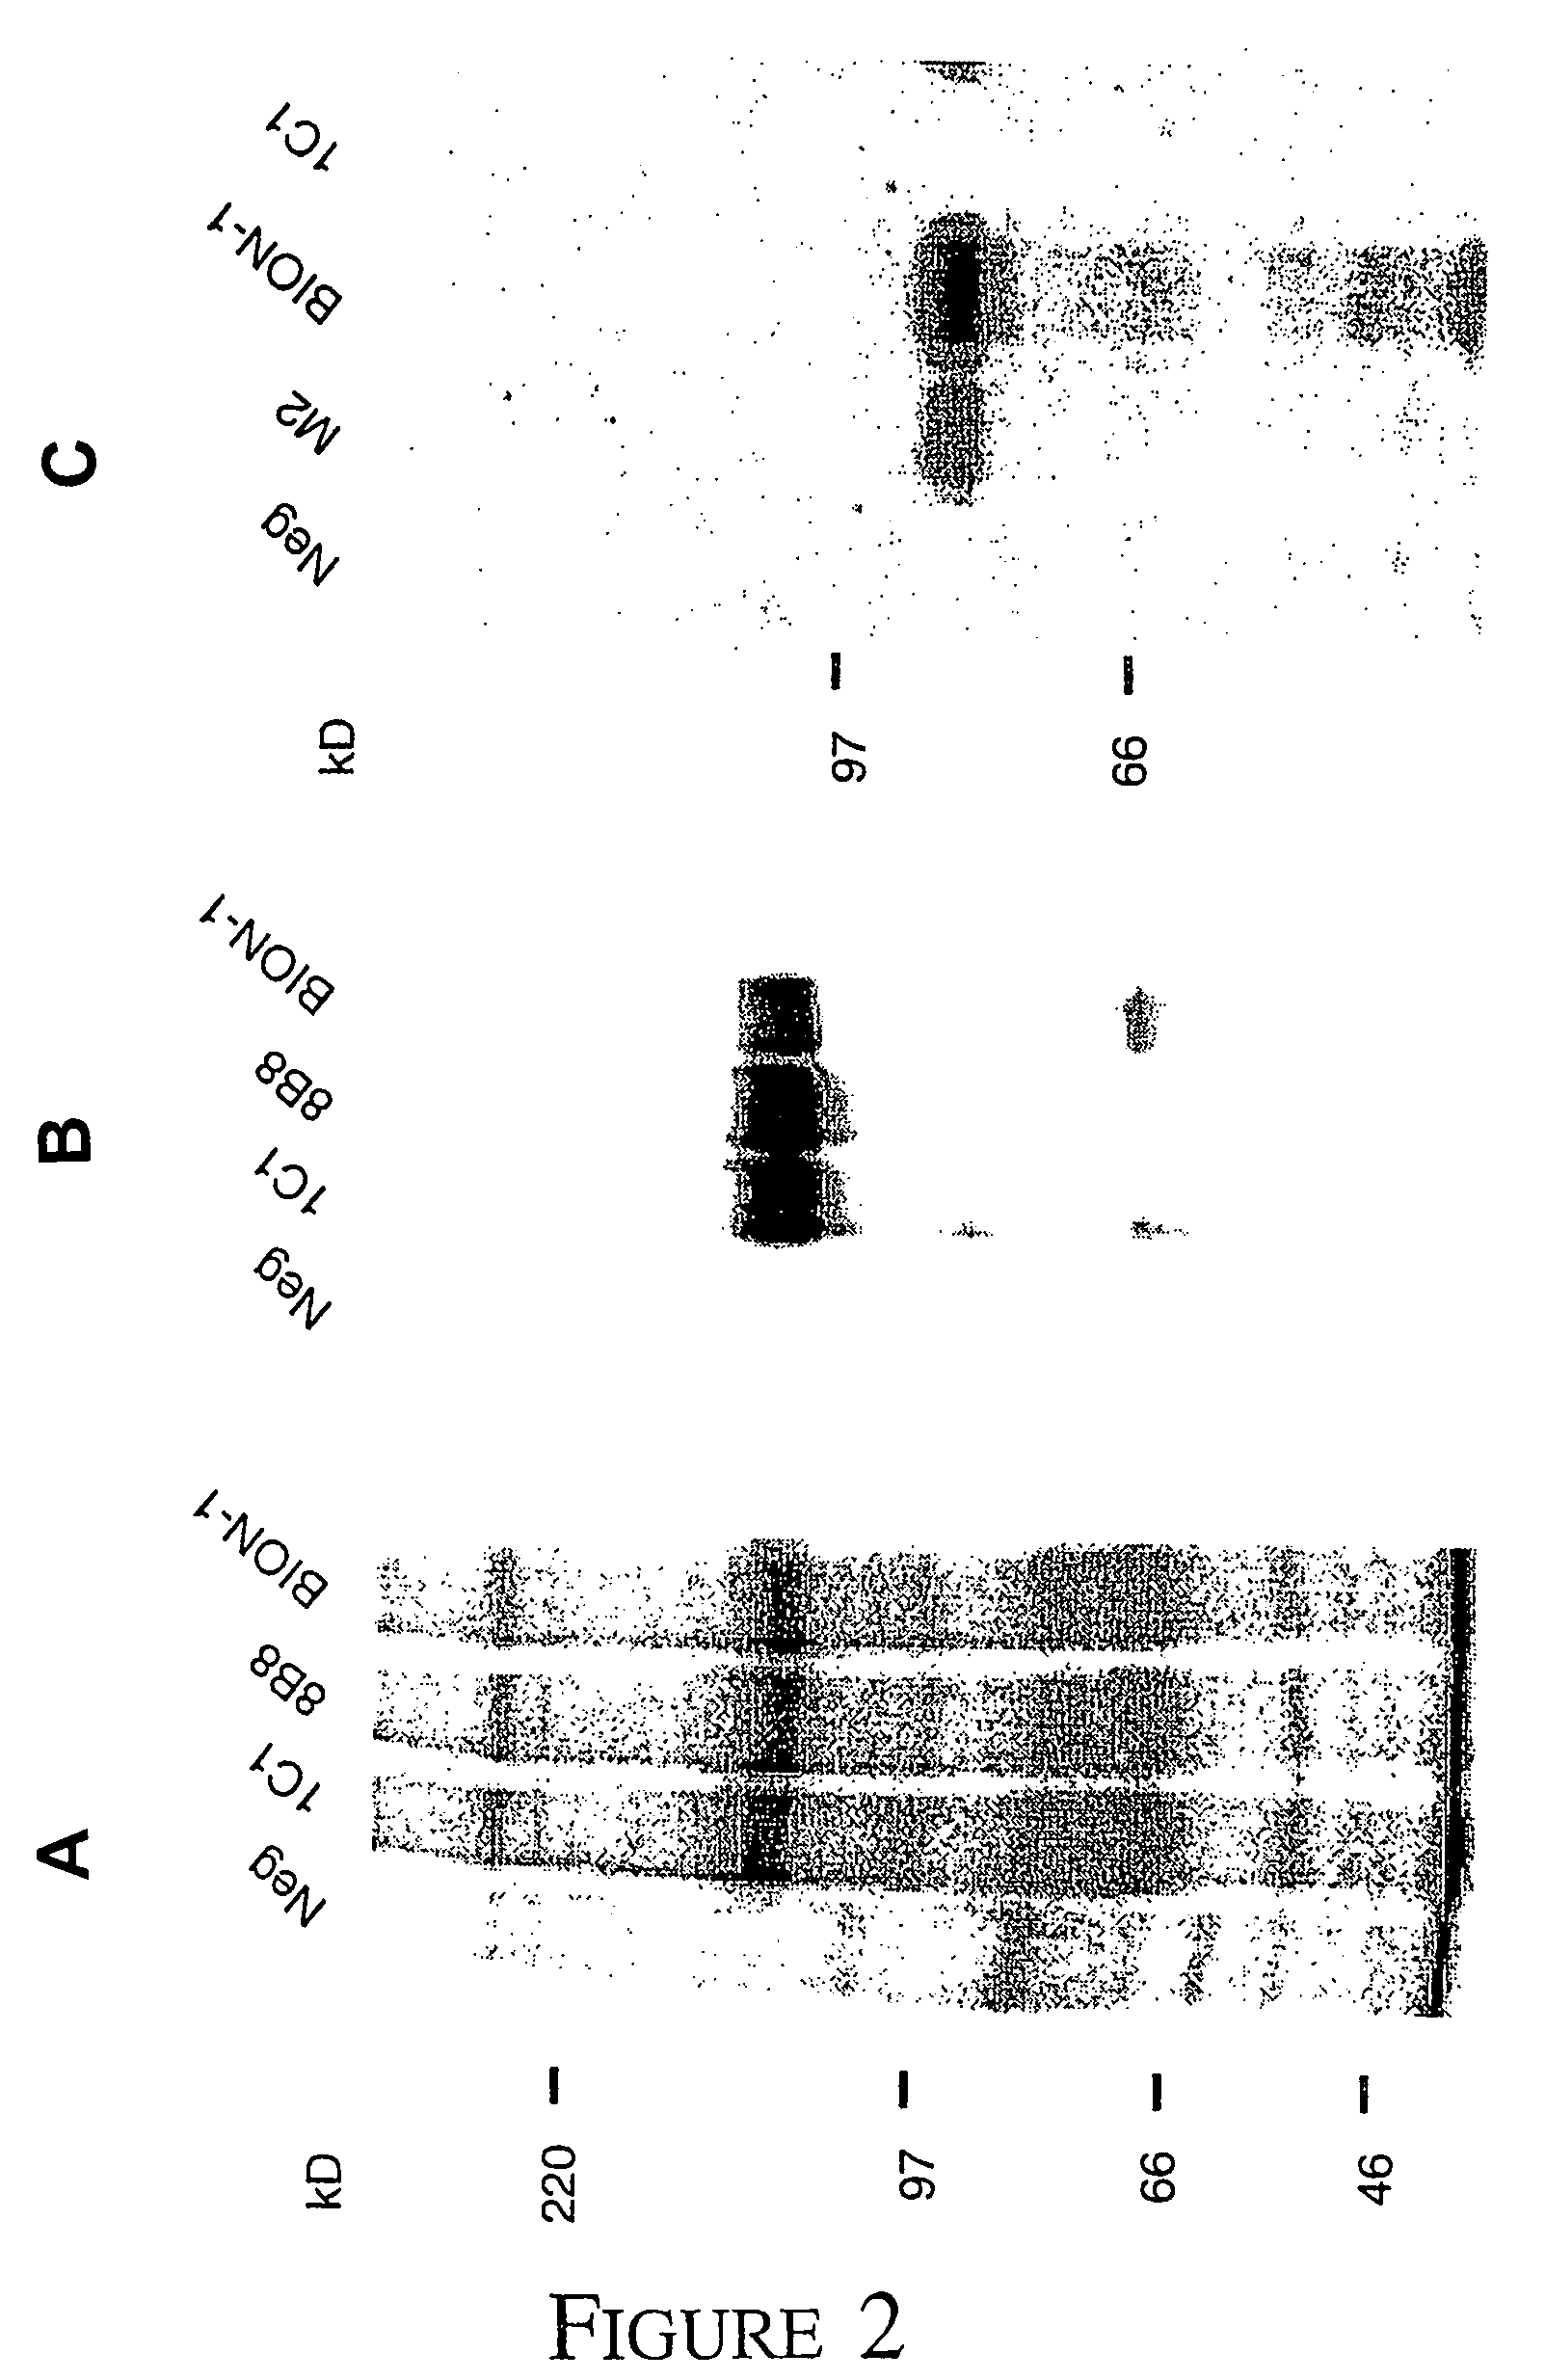 Method of modulating leukemic cell and eosinphil activity with monoclonal antibodies